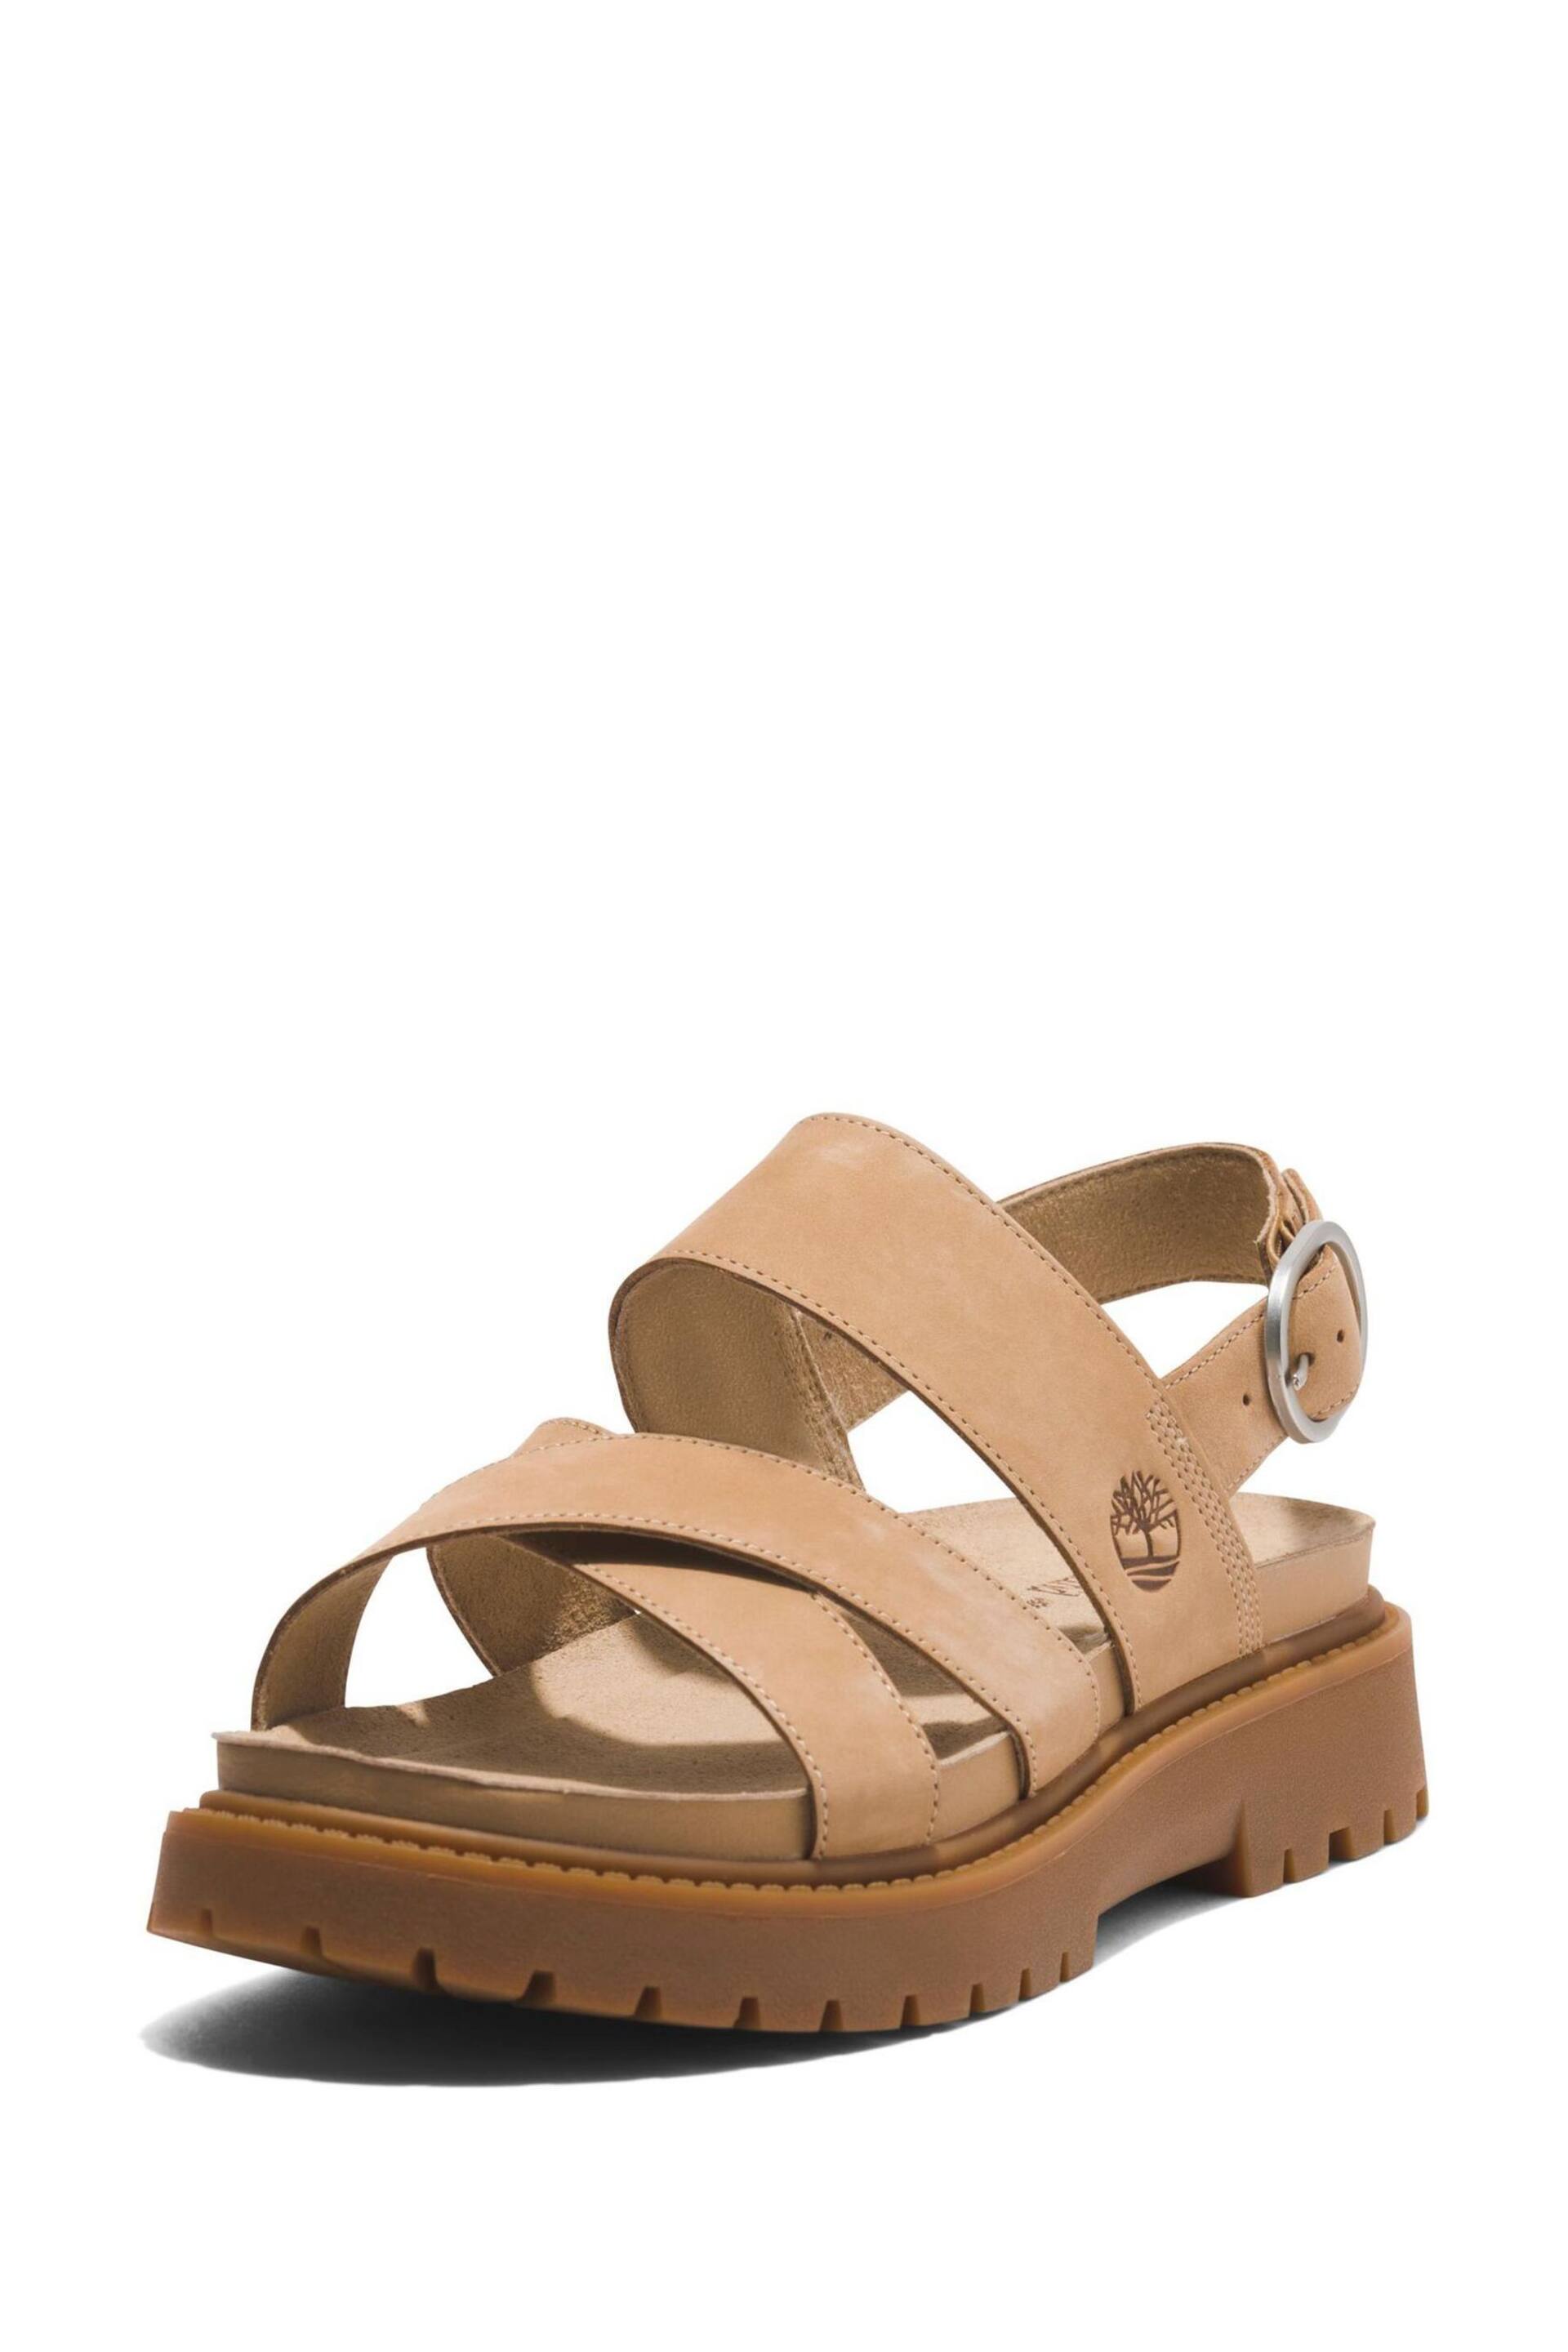 Timberland Cream Clairemont Way Cross Strap Sandals - Image 3 of 7